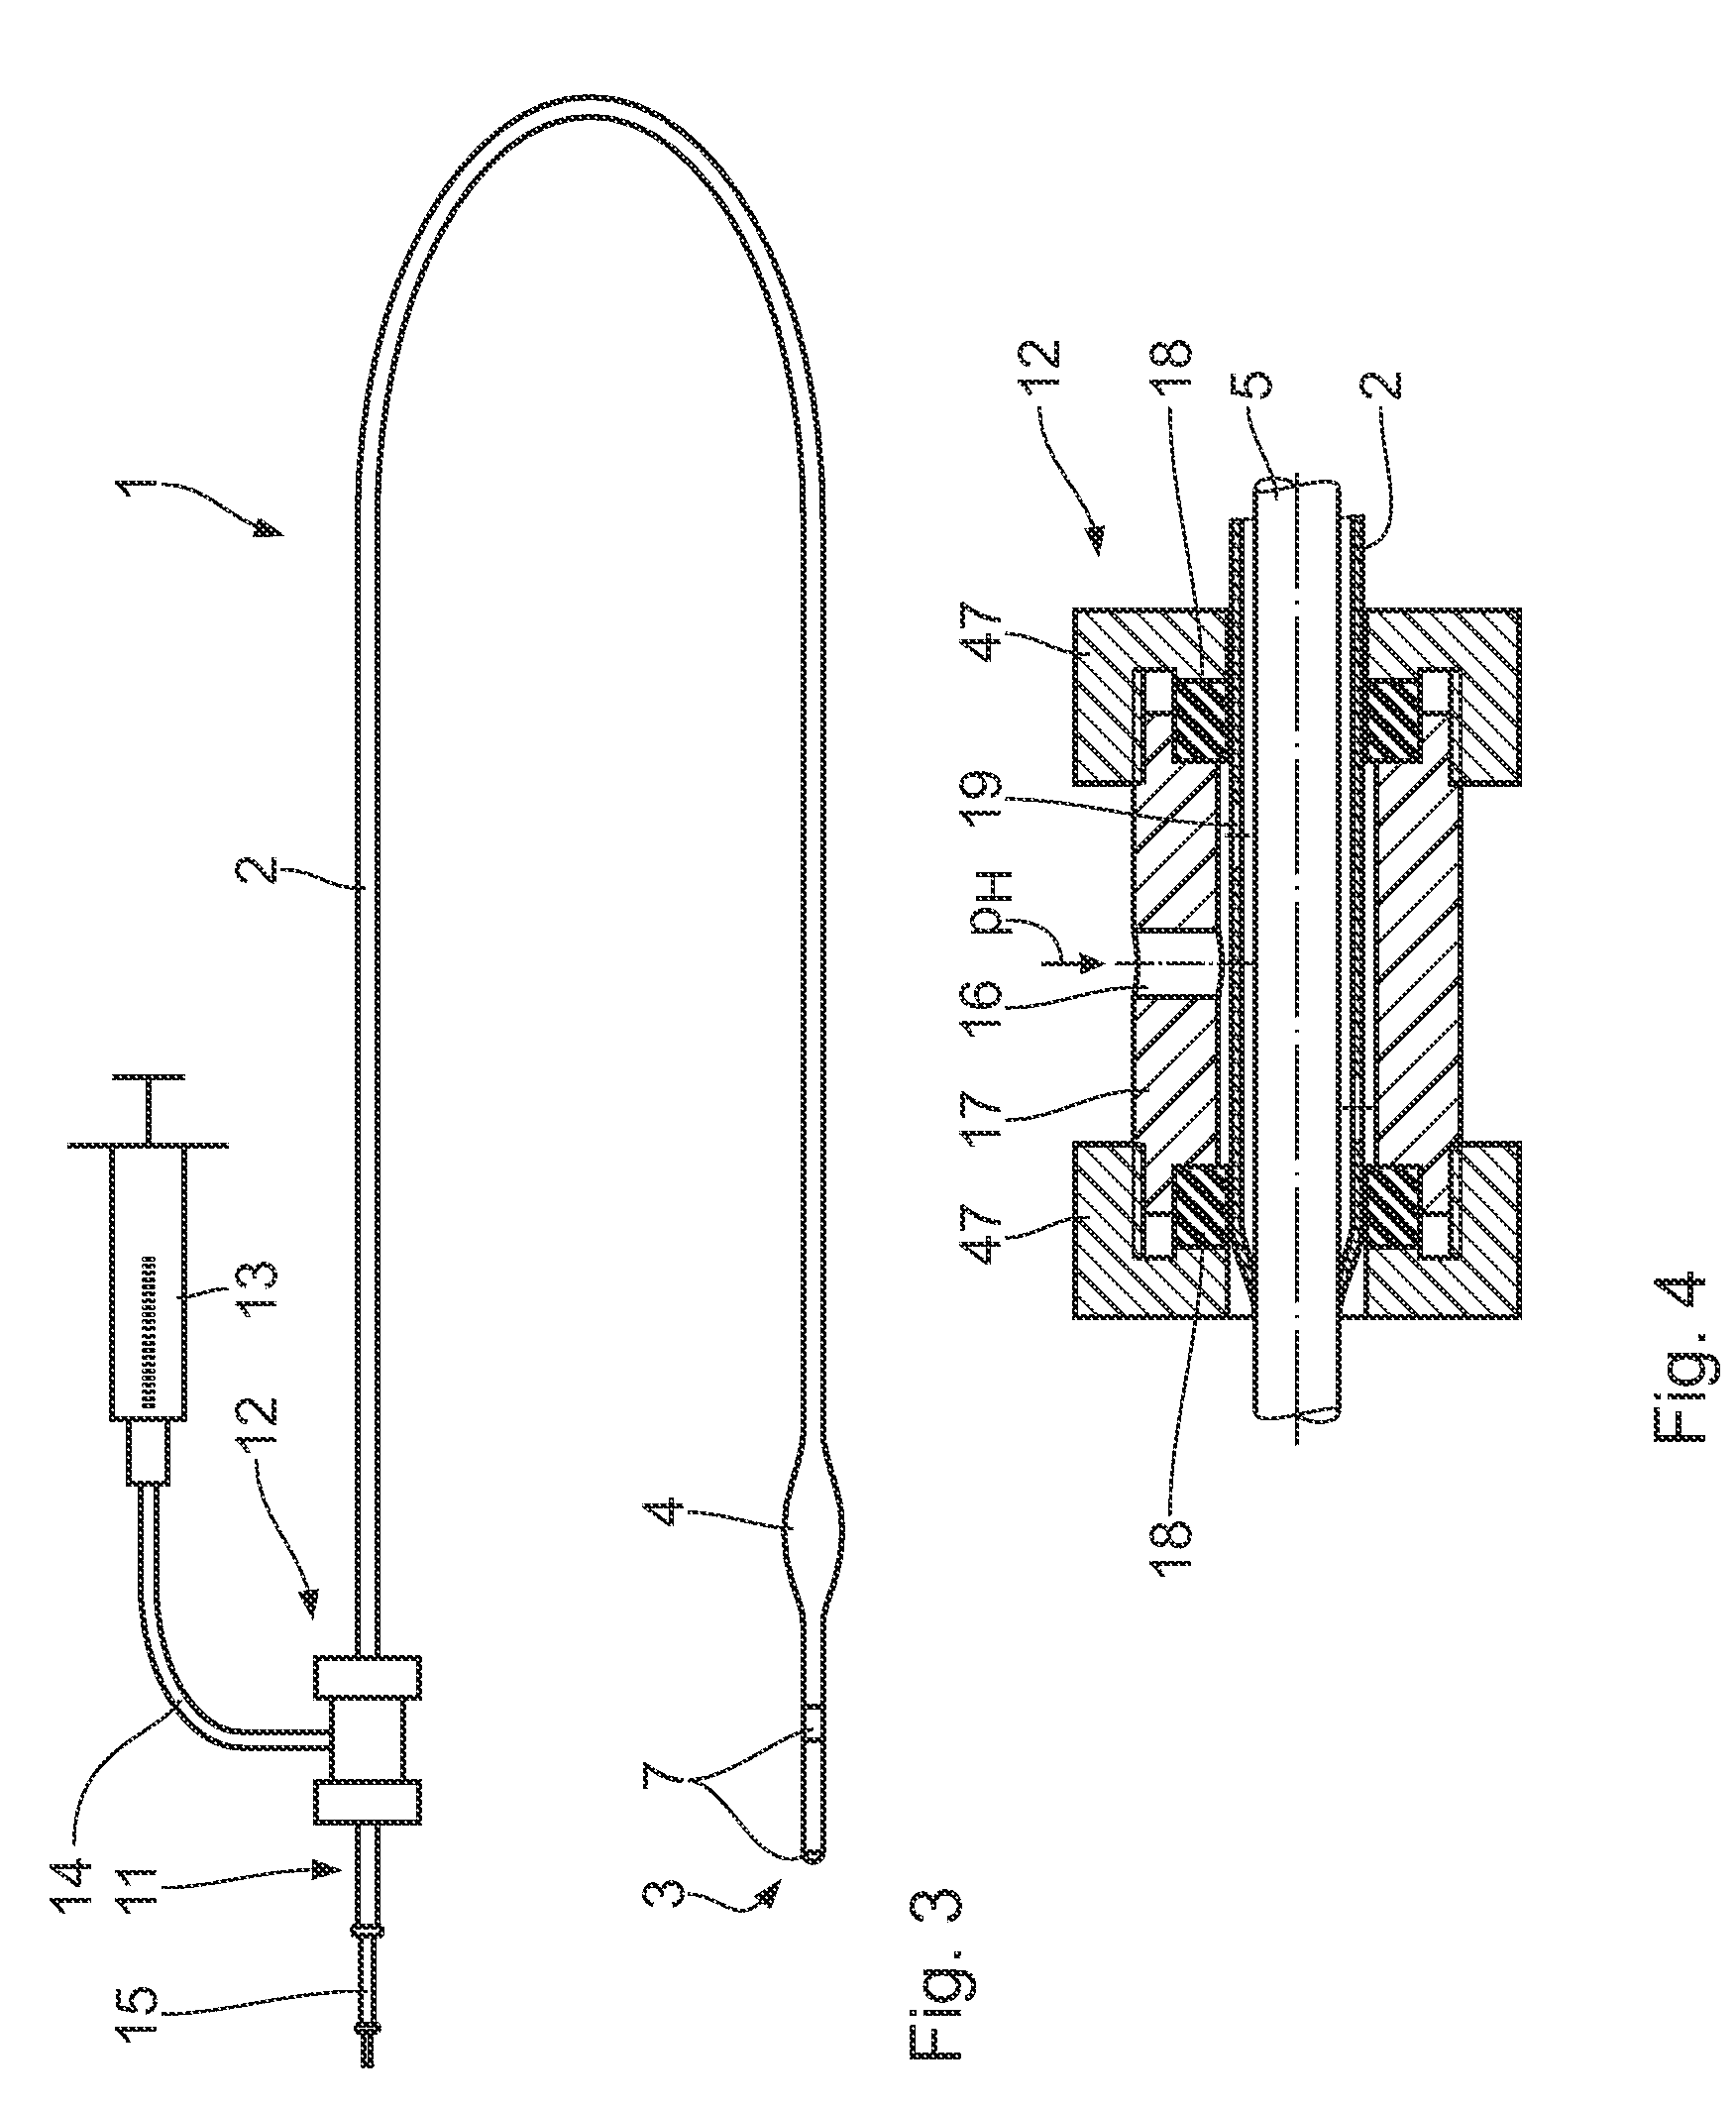 Implantable medical electrode device, in particular cardiovascular cardiac pacemaker or defibrillator electrode device